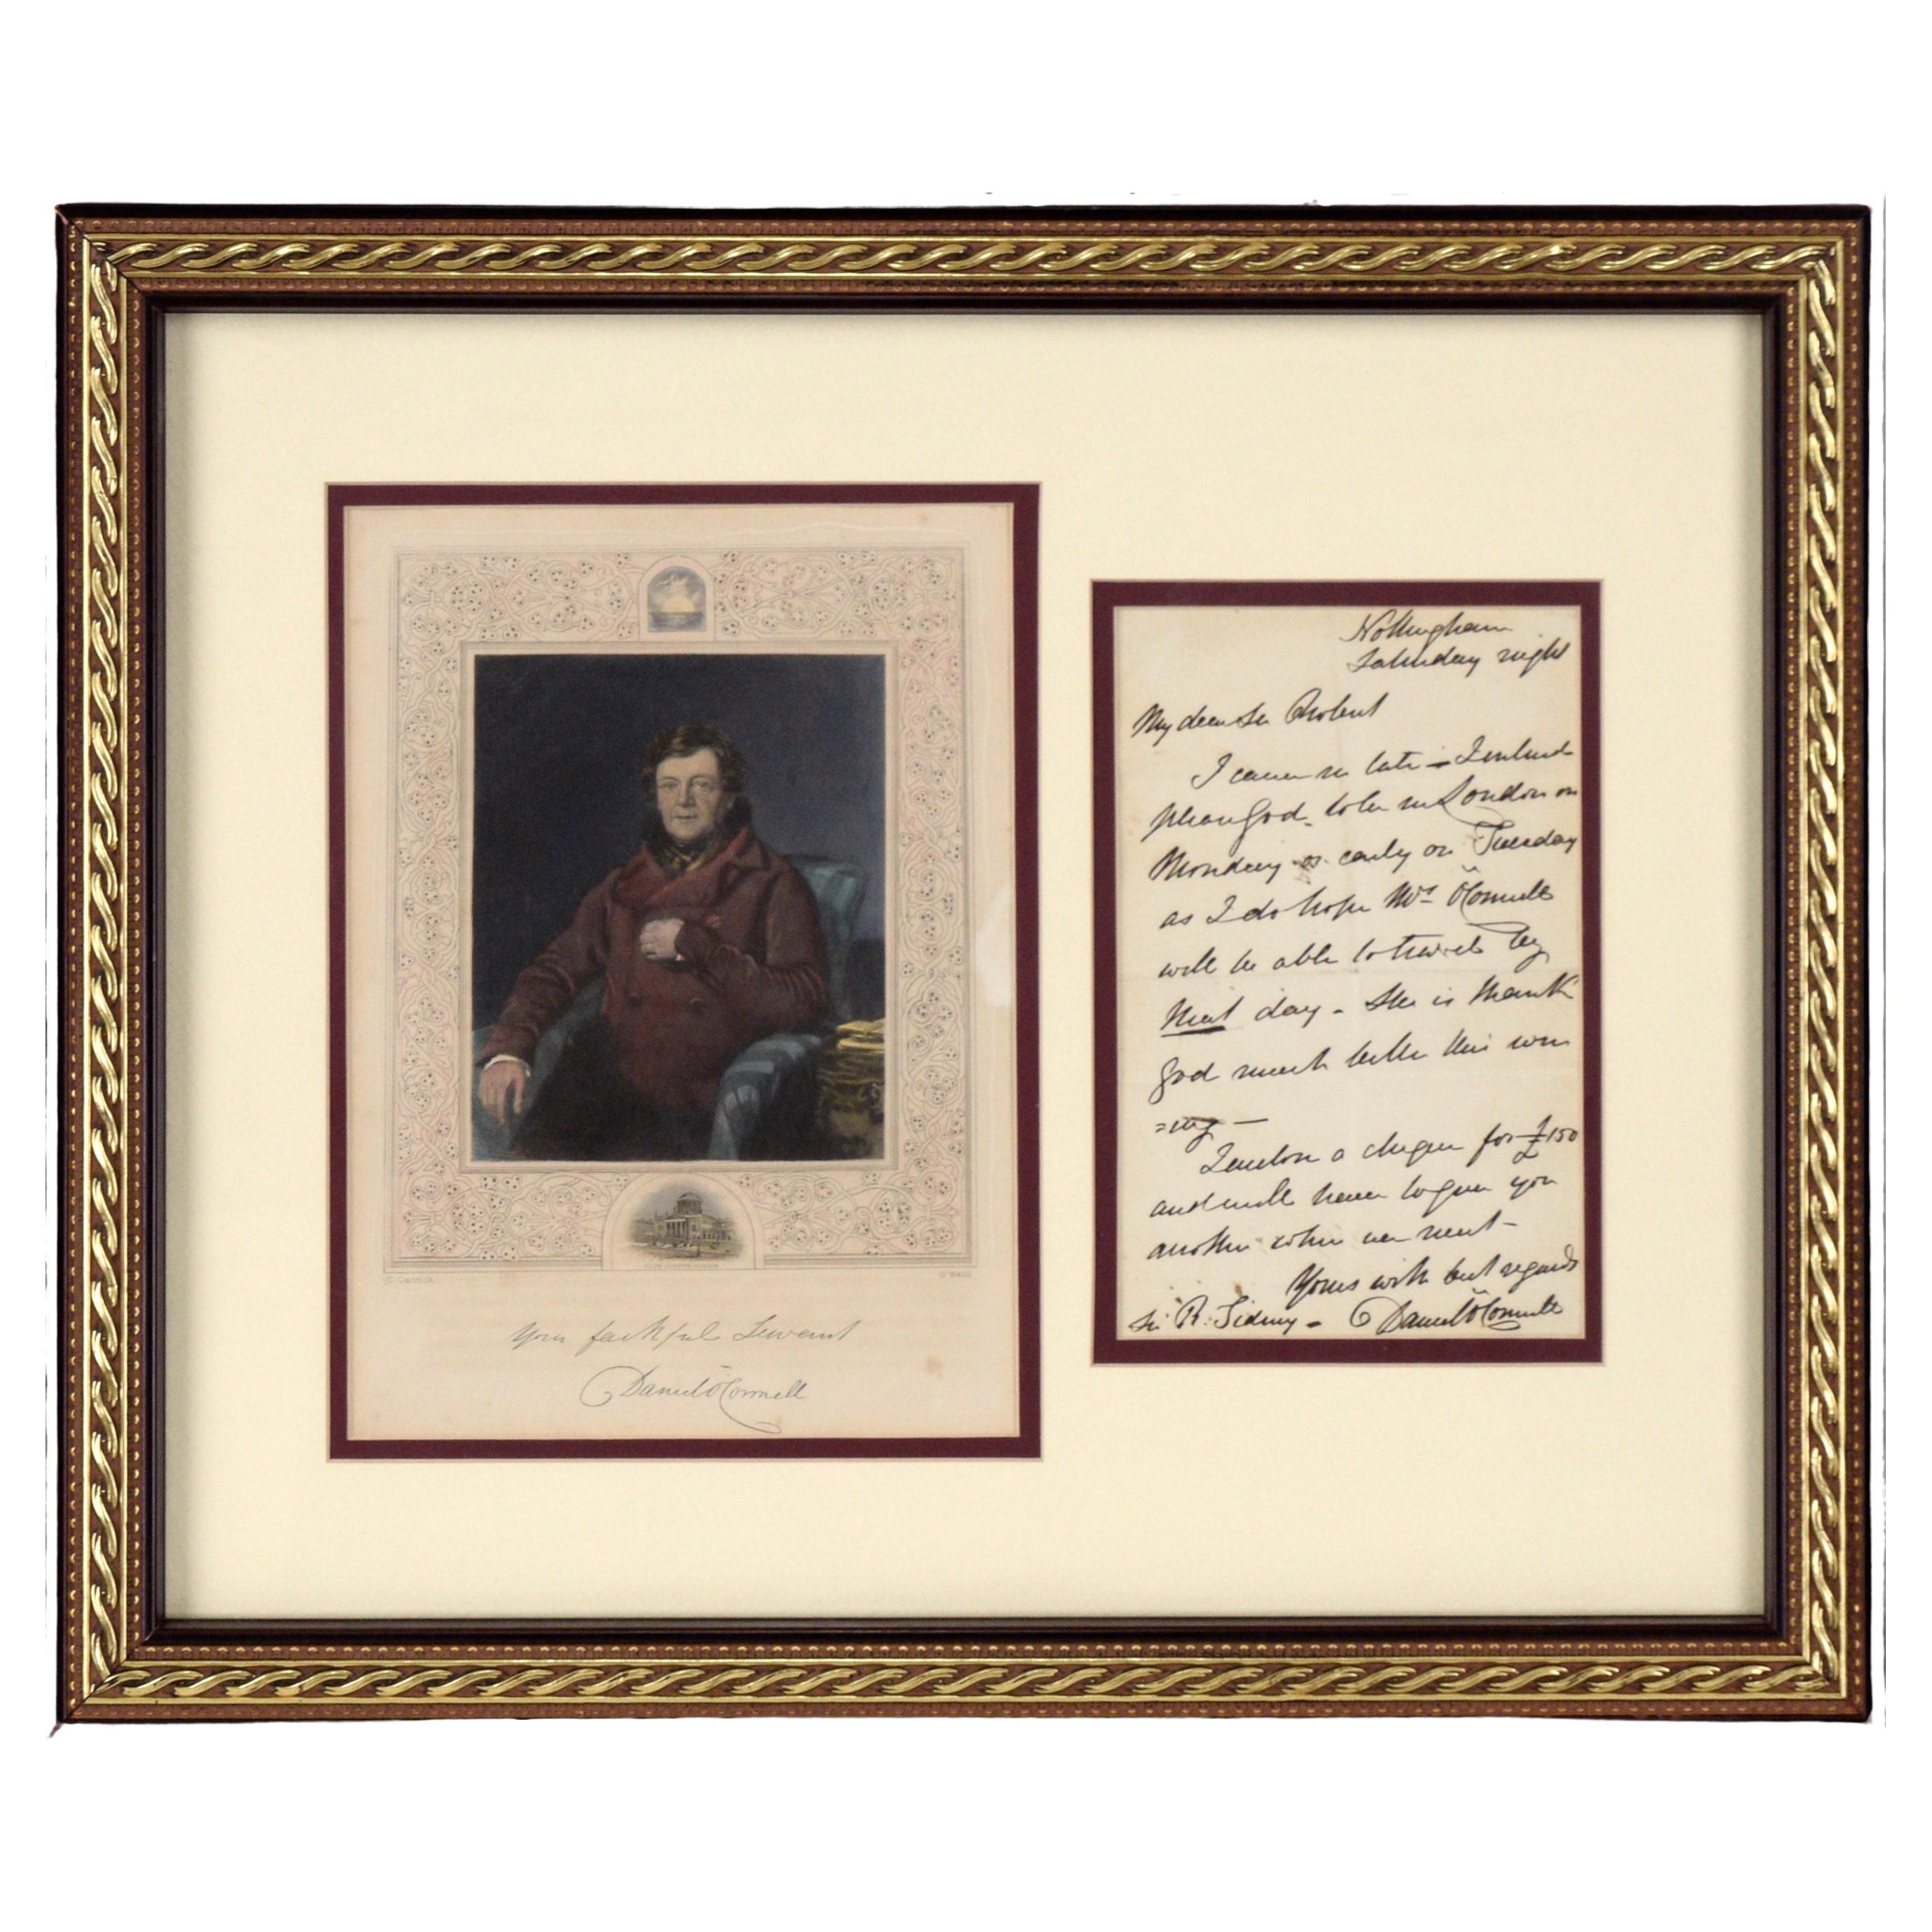 Hand Written Letter from Daniel O'Connell, with Portrait Engraving by O'Neil